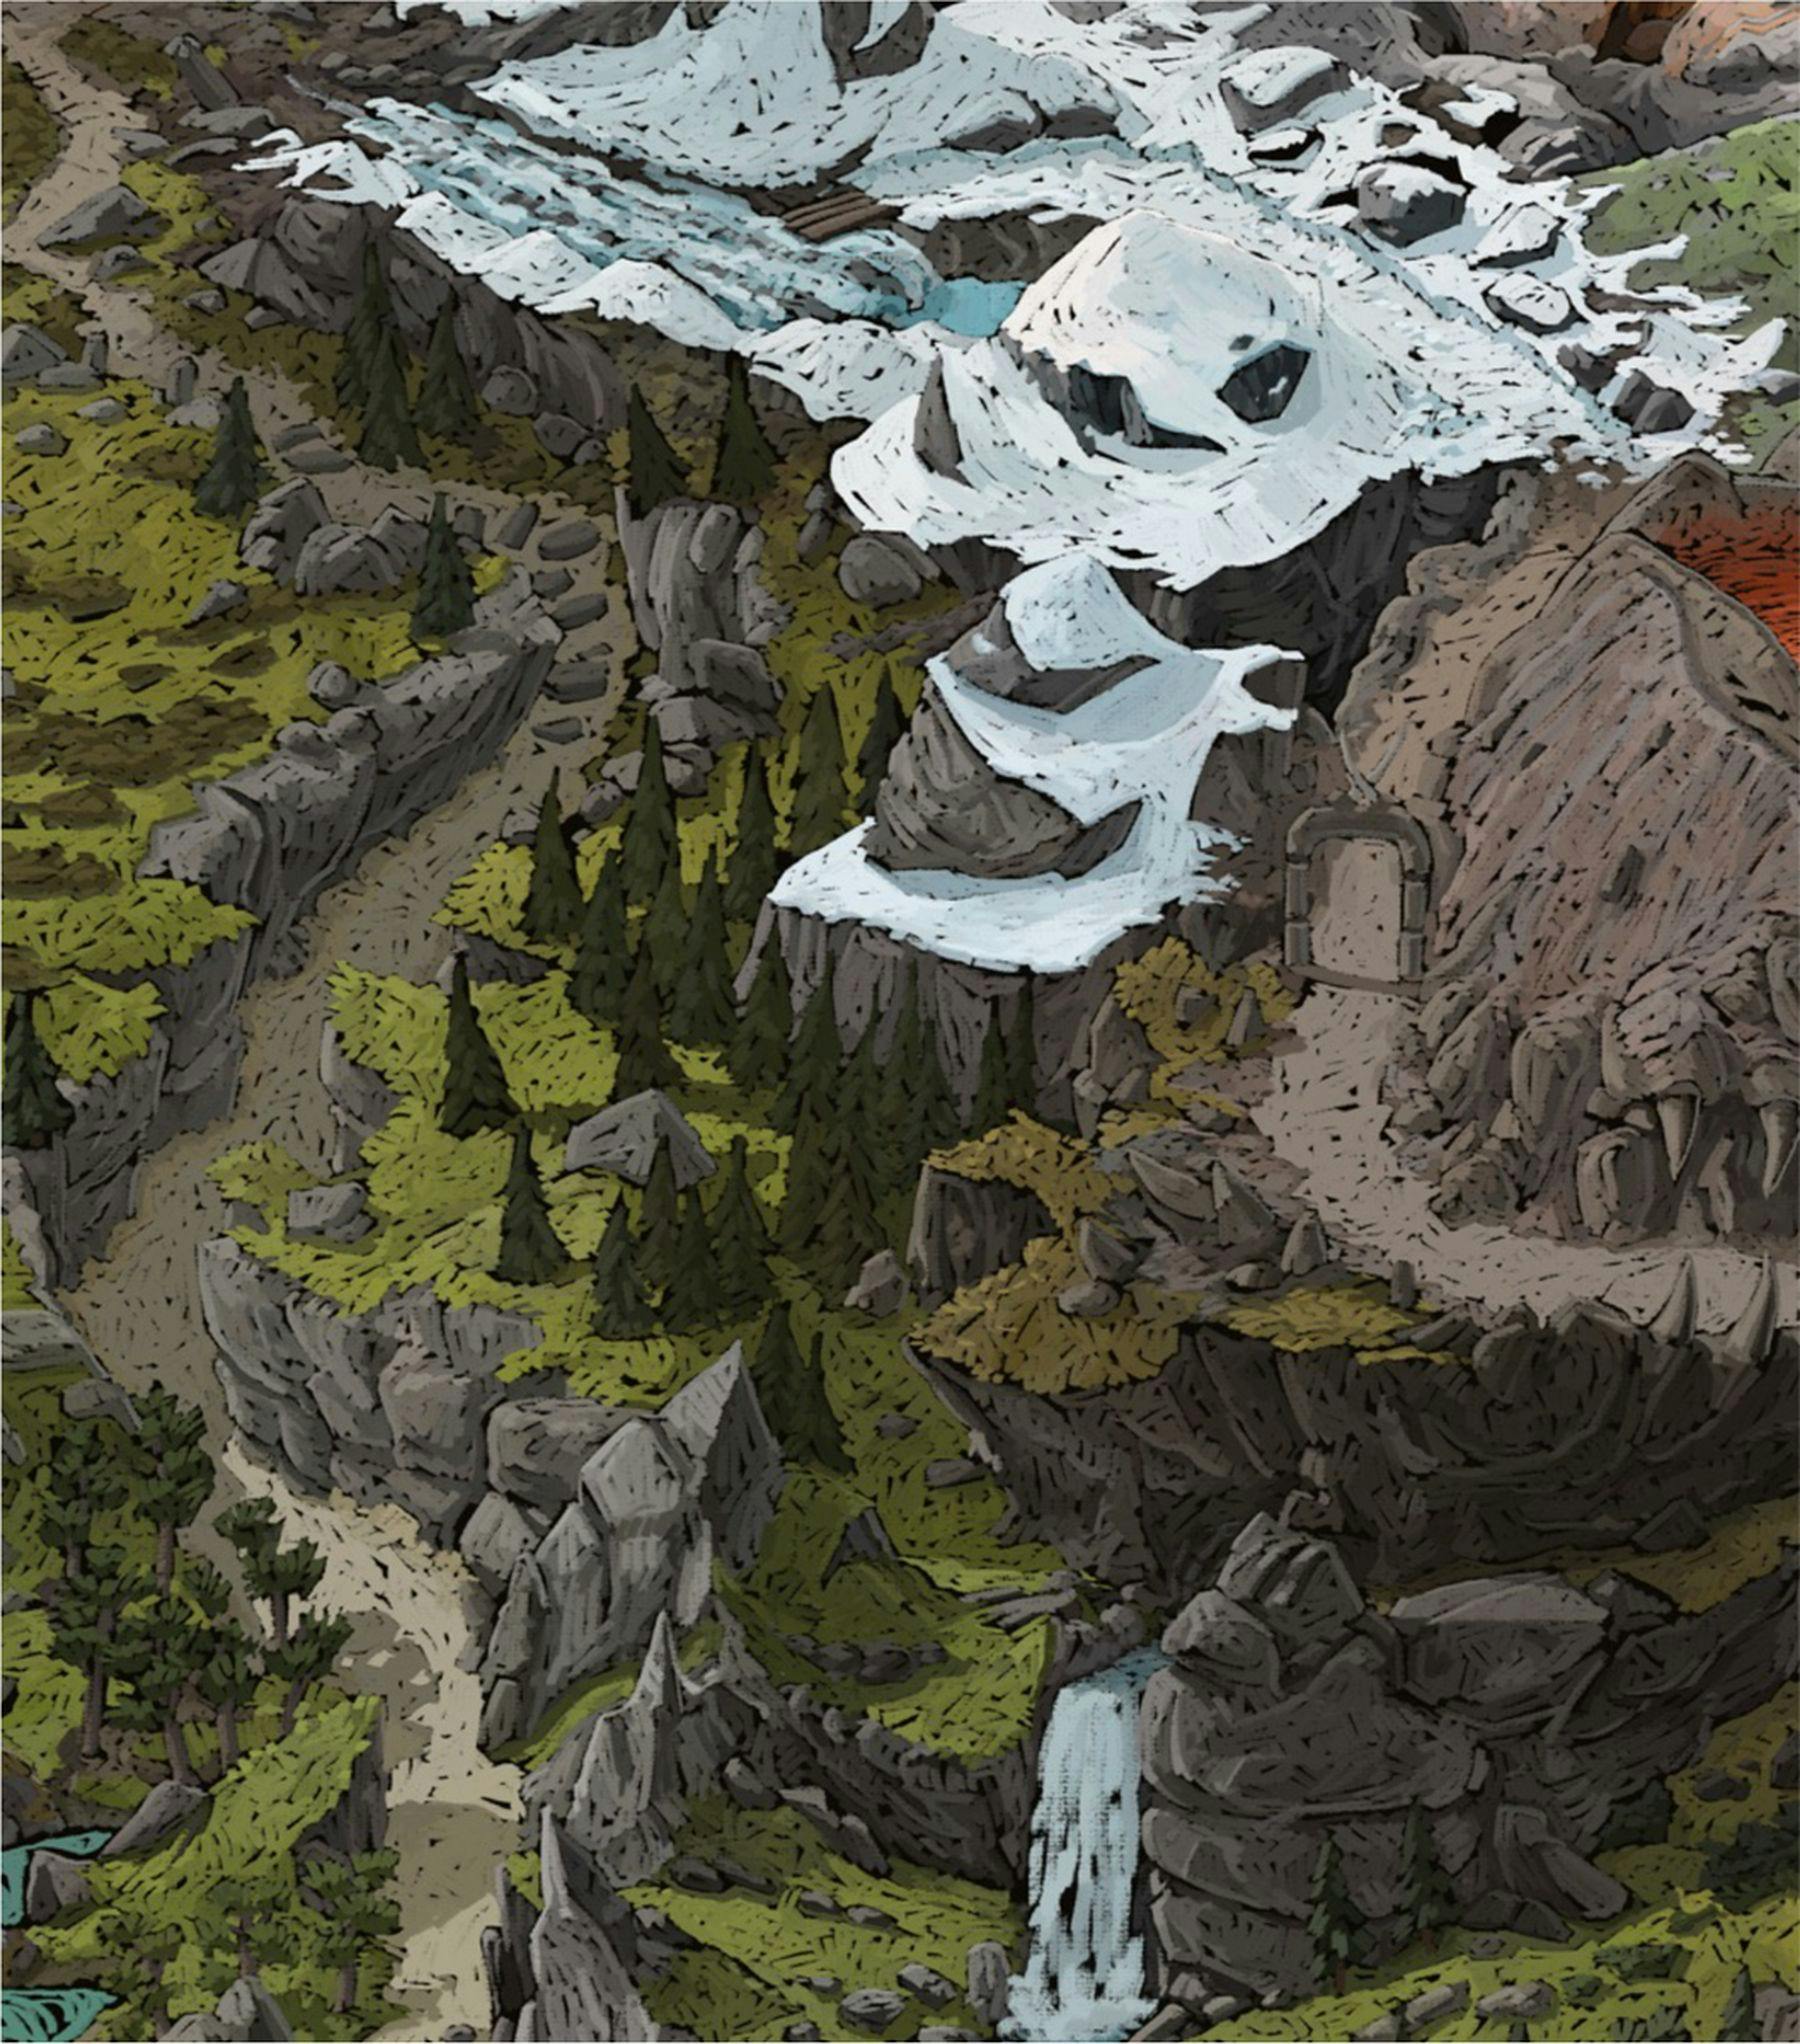 Digital drawing of a rocky patch of land. The grey rocks are dappled with white and green. Between the rocks lies a winding path, a waterfall and some green trees.